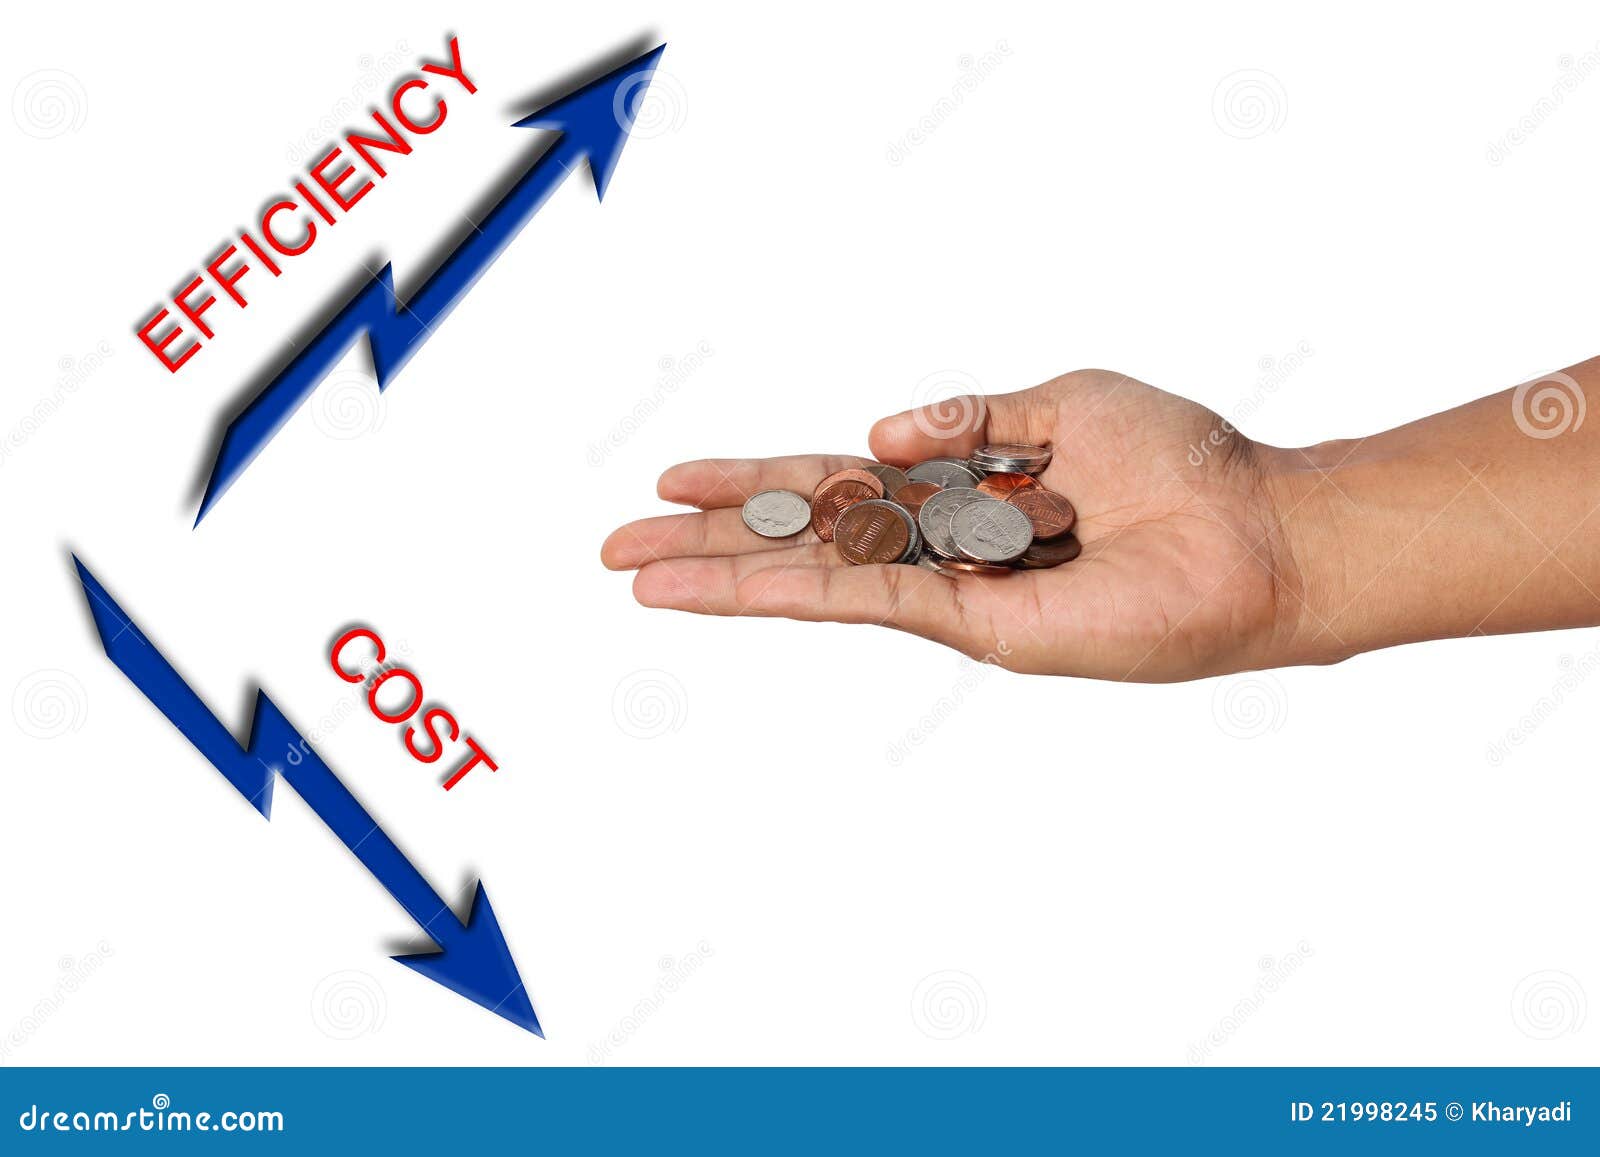 hand holding cents with efficiency and cost arrow.